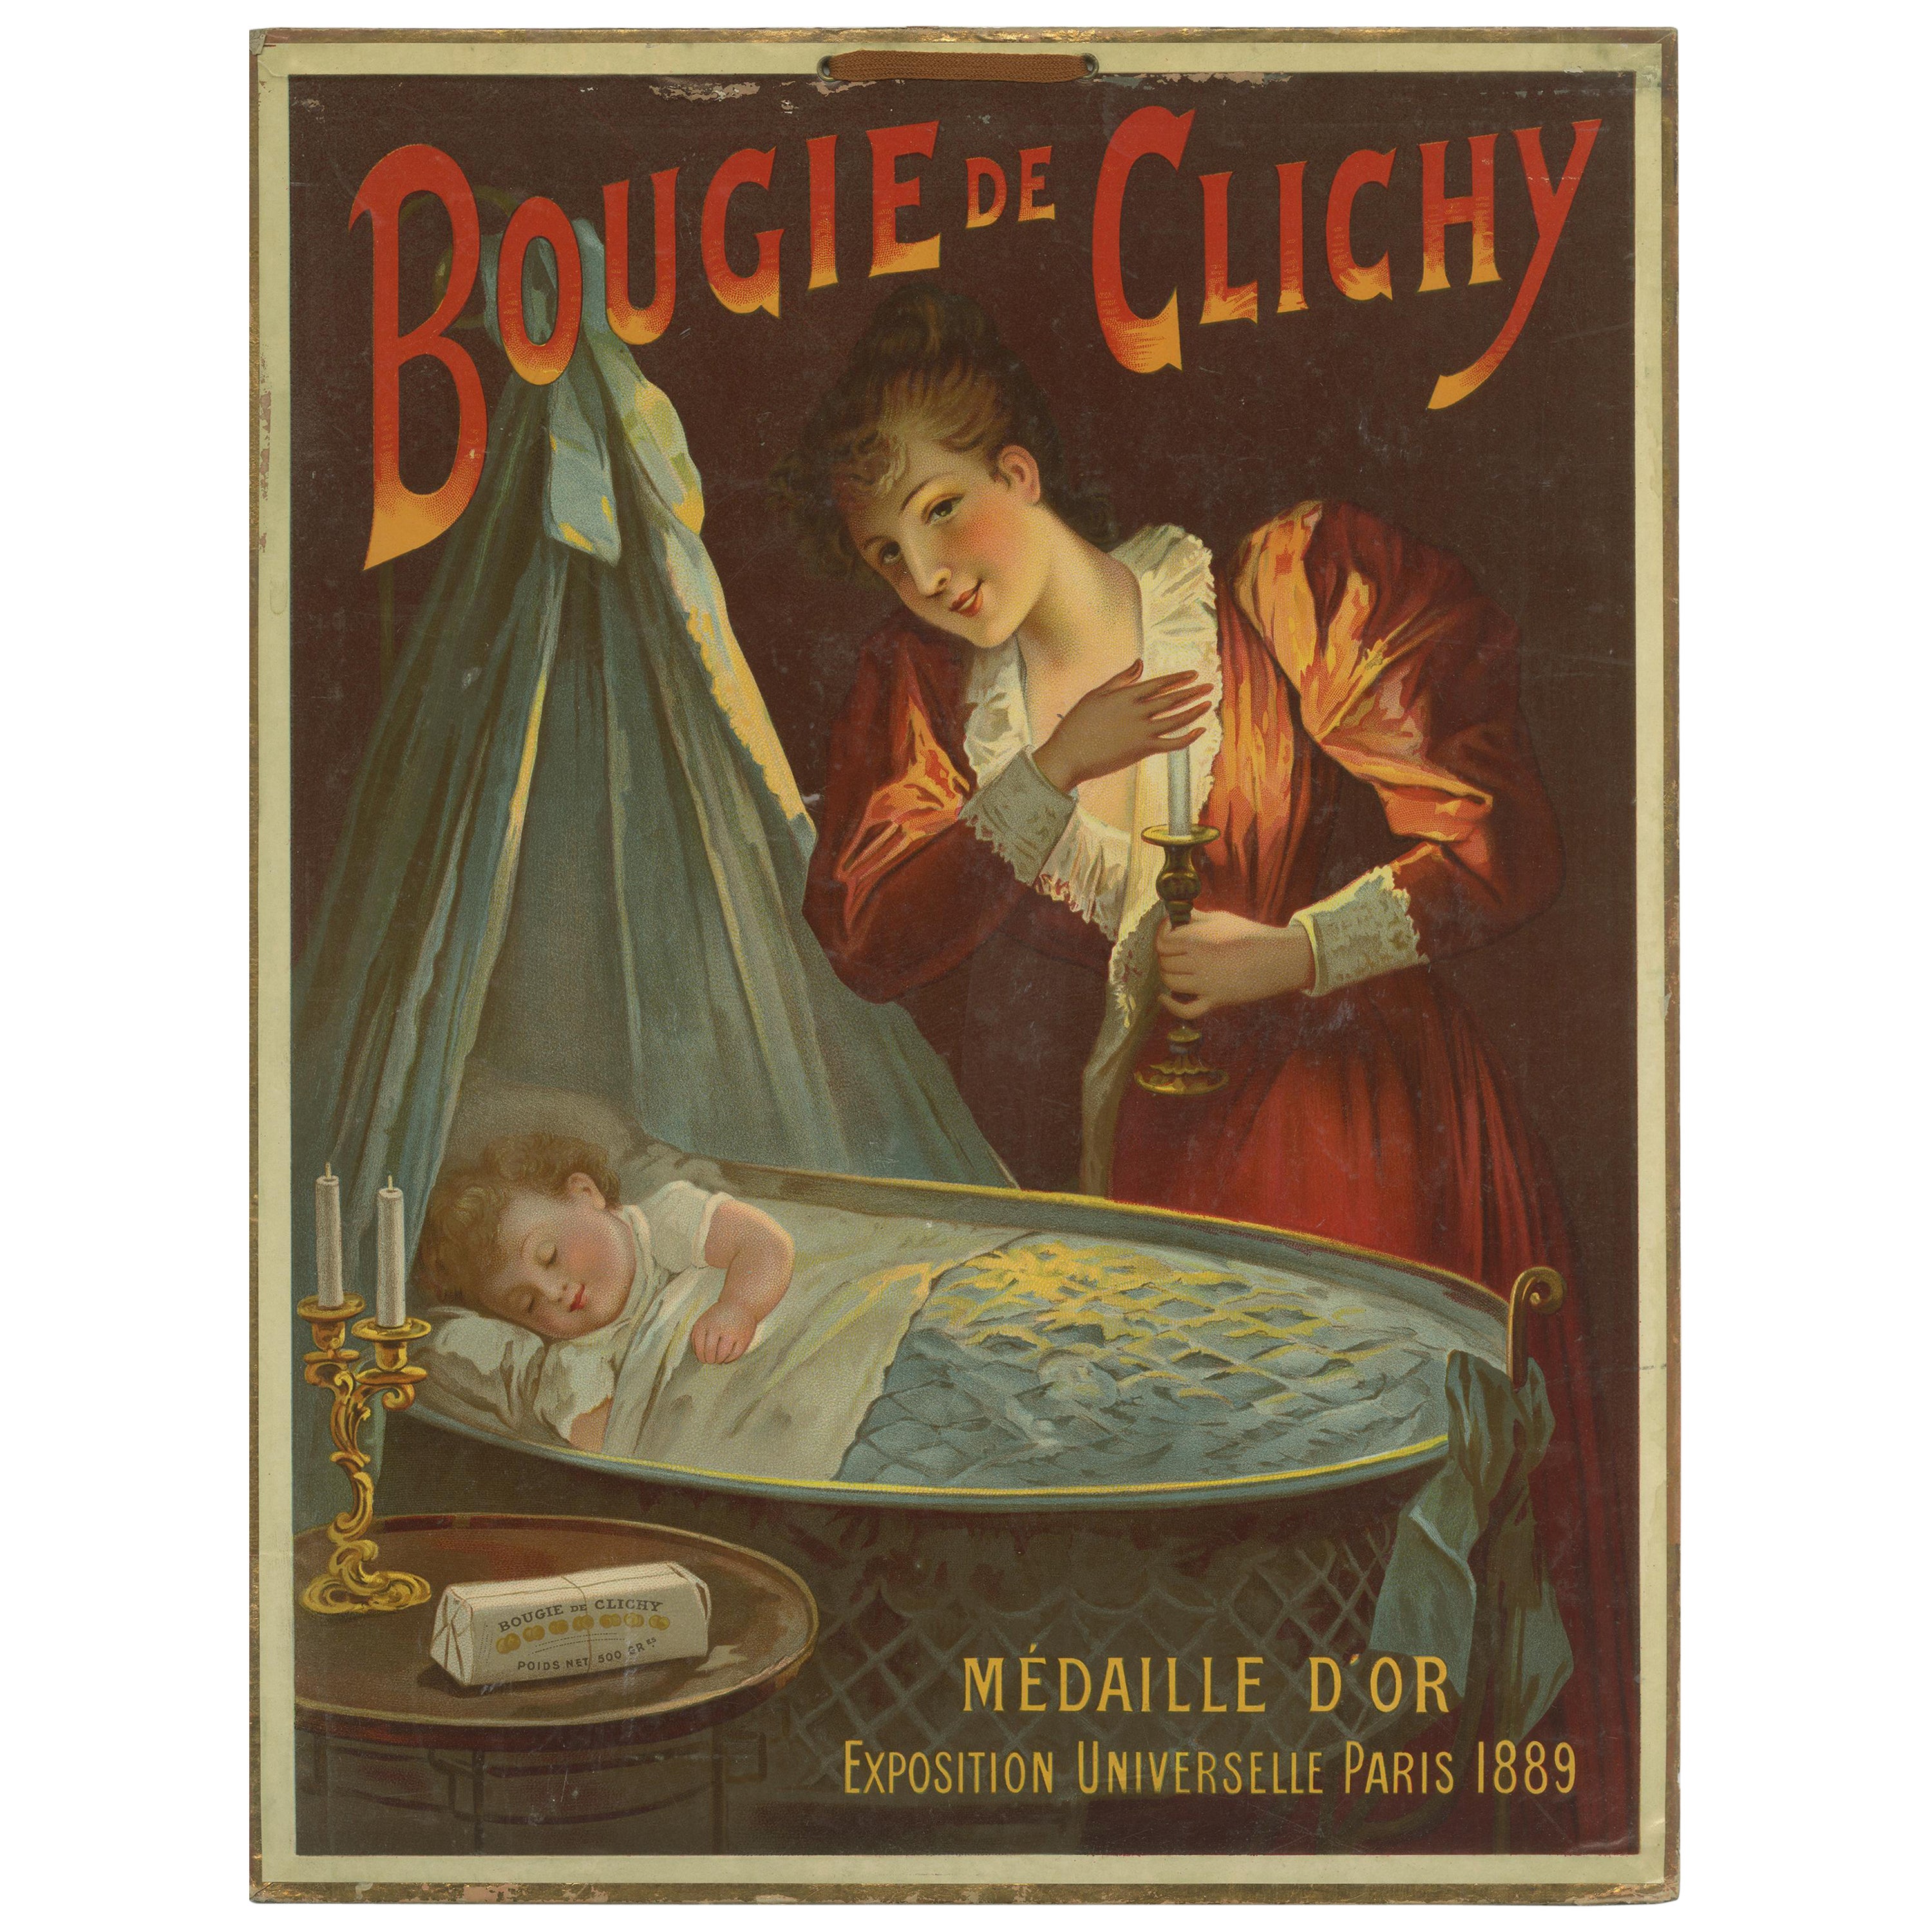 Original Vintage Lithograph on Board Promoting Candles, ca.1900 For Sale